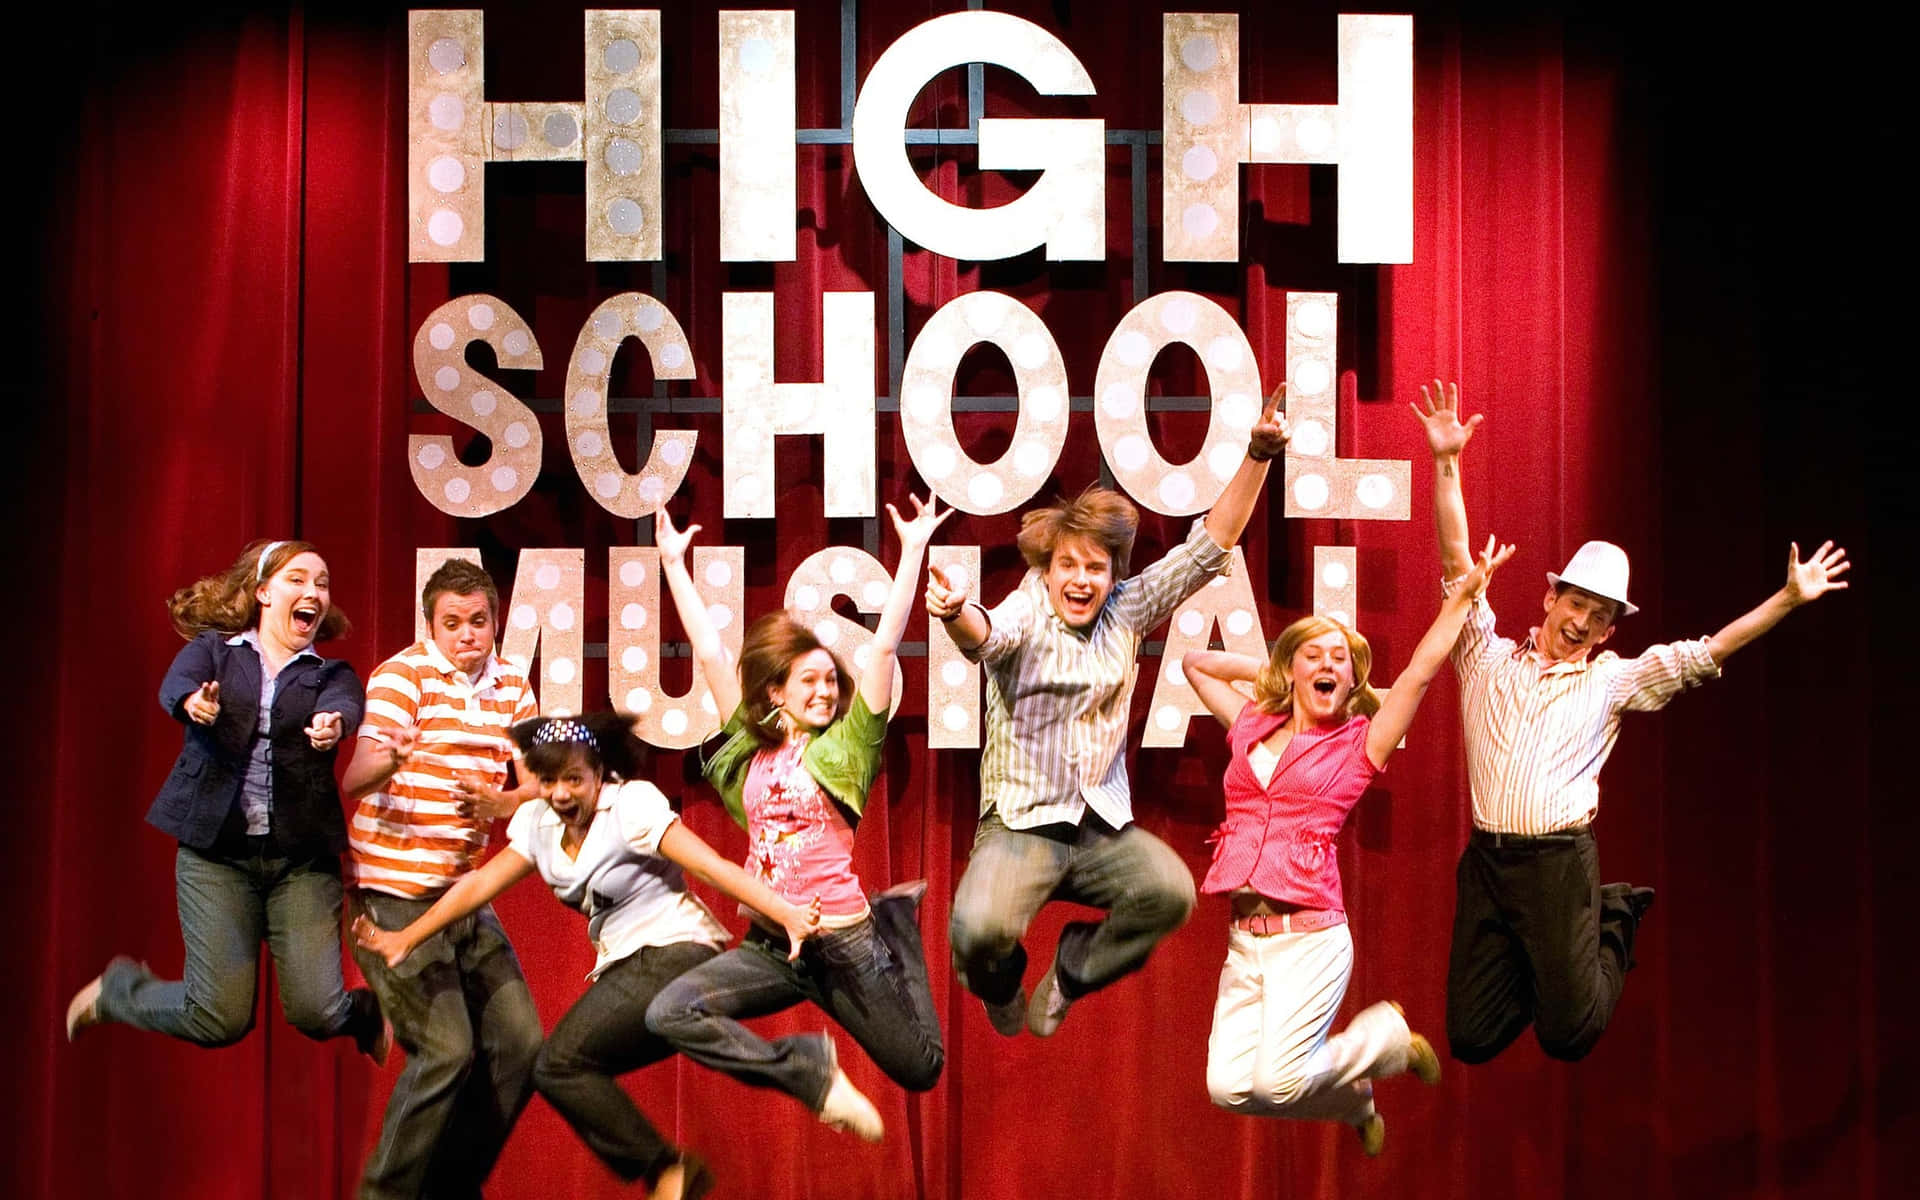 High School Musical Stars on Stage